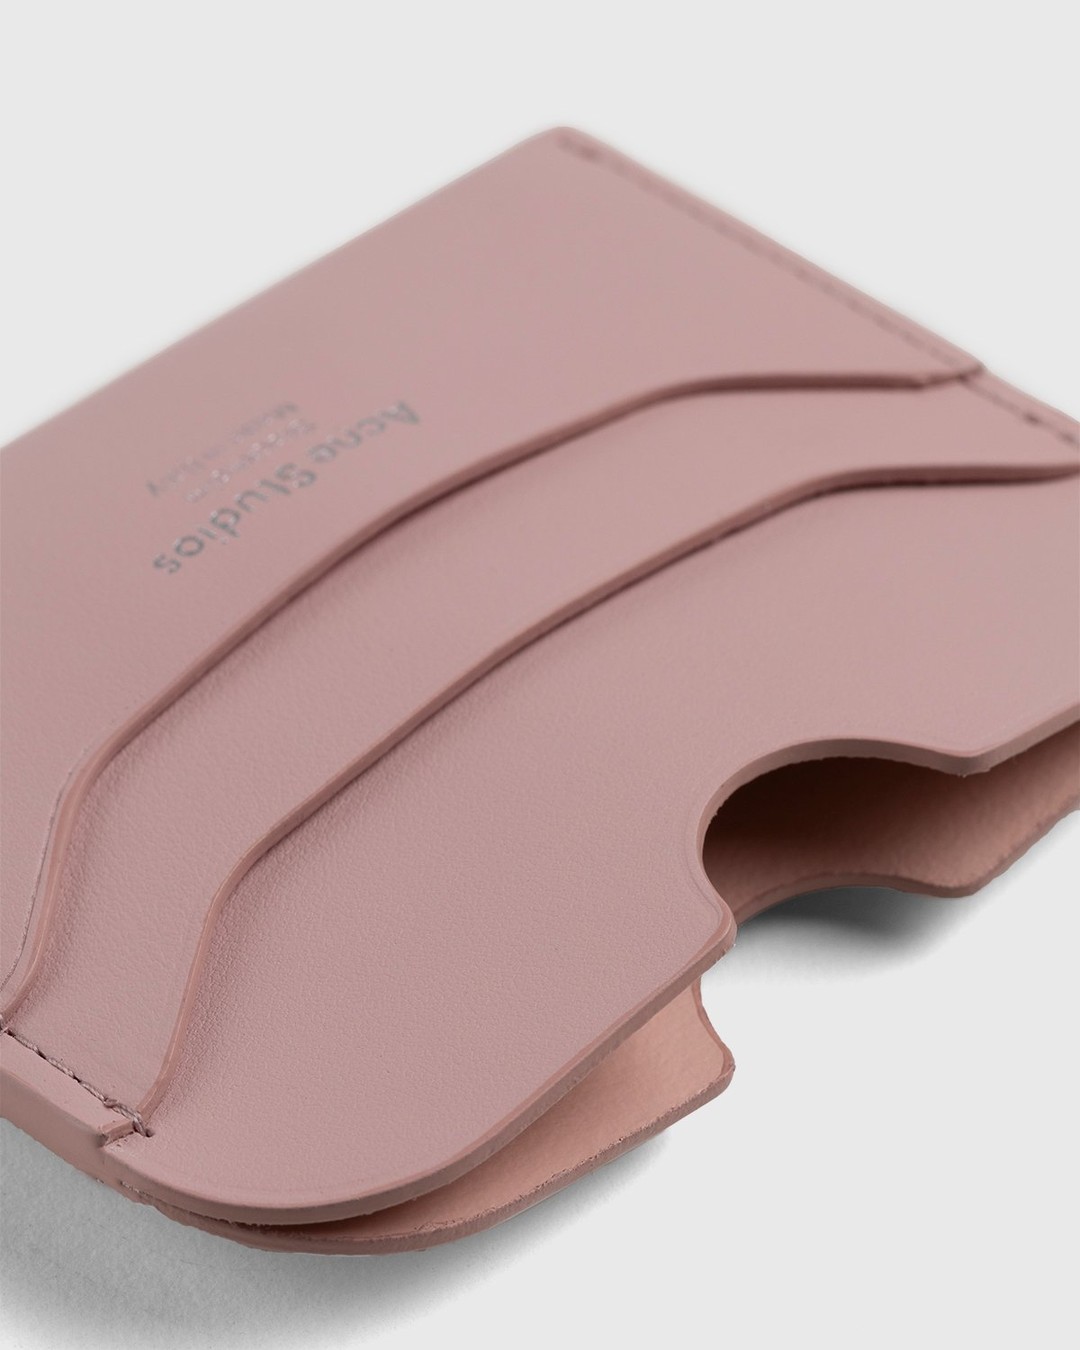 Acne Studios – Leather Card Case Powder Pink - Wallets - Pink - Image 4